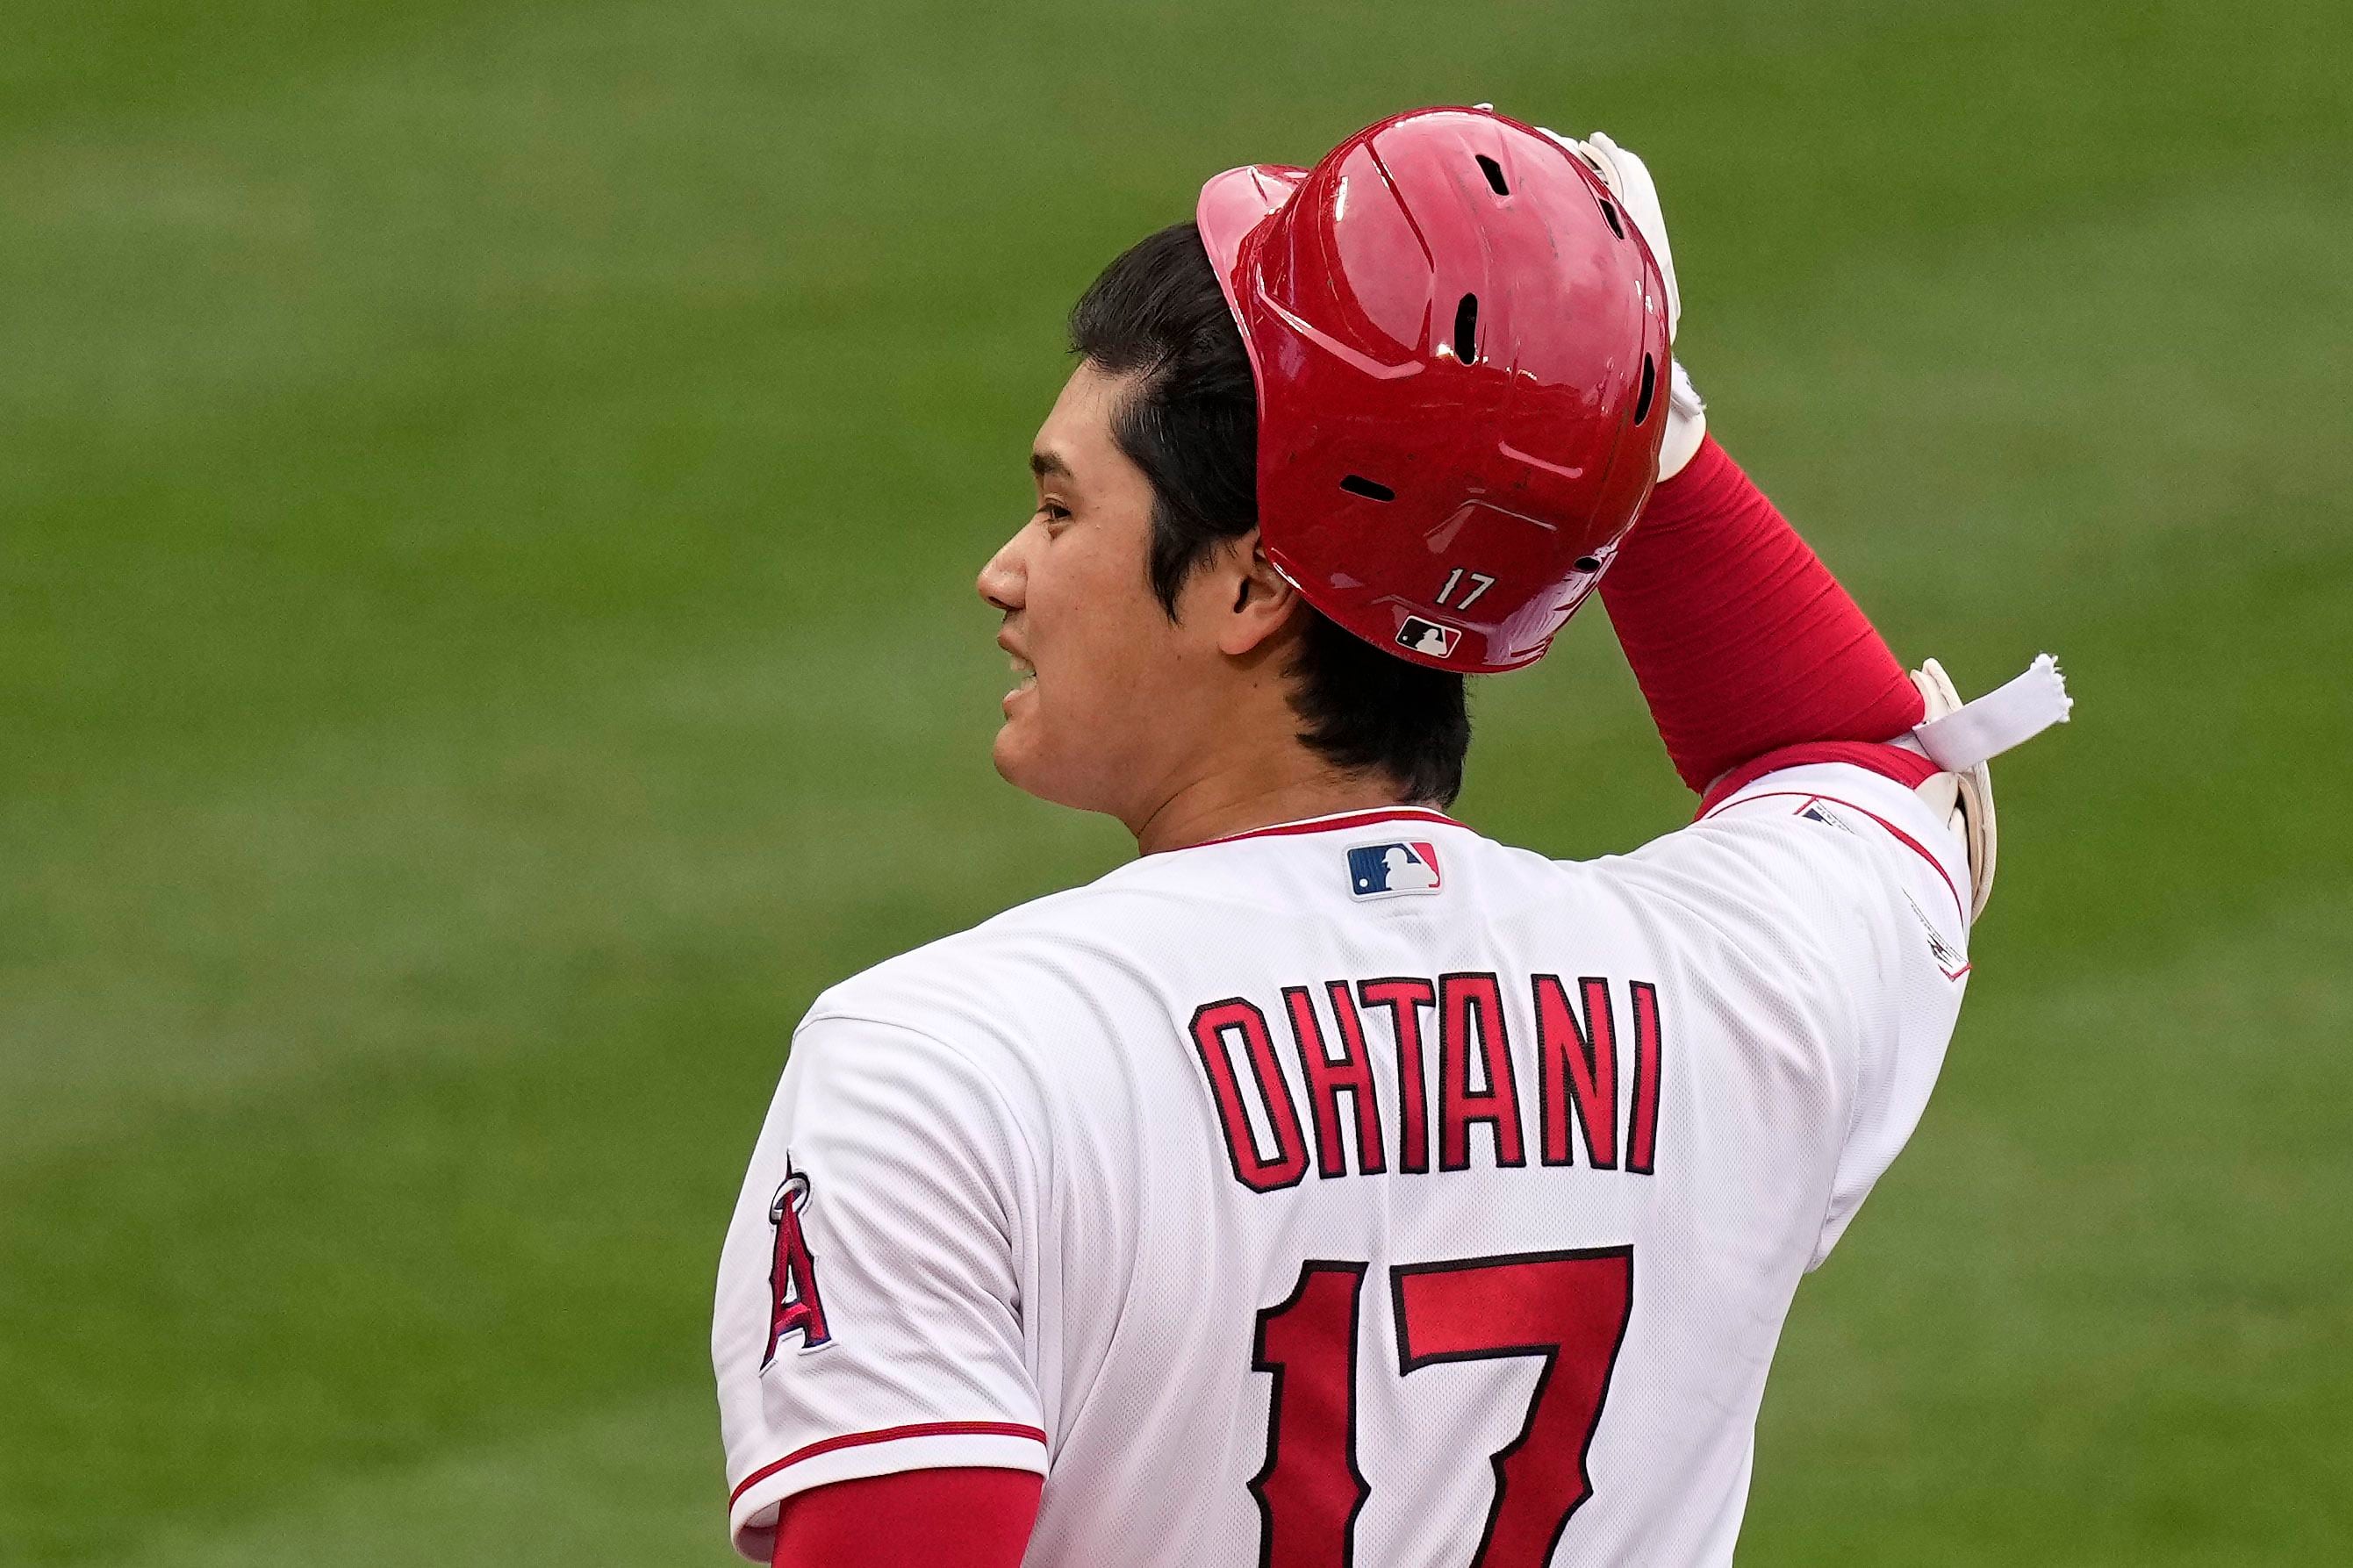 Mike Trout: 'Got to be' Angels' year with Shohei Ohtani uncertainty